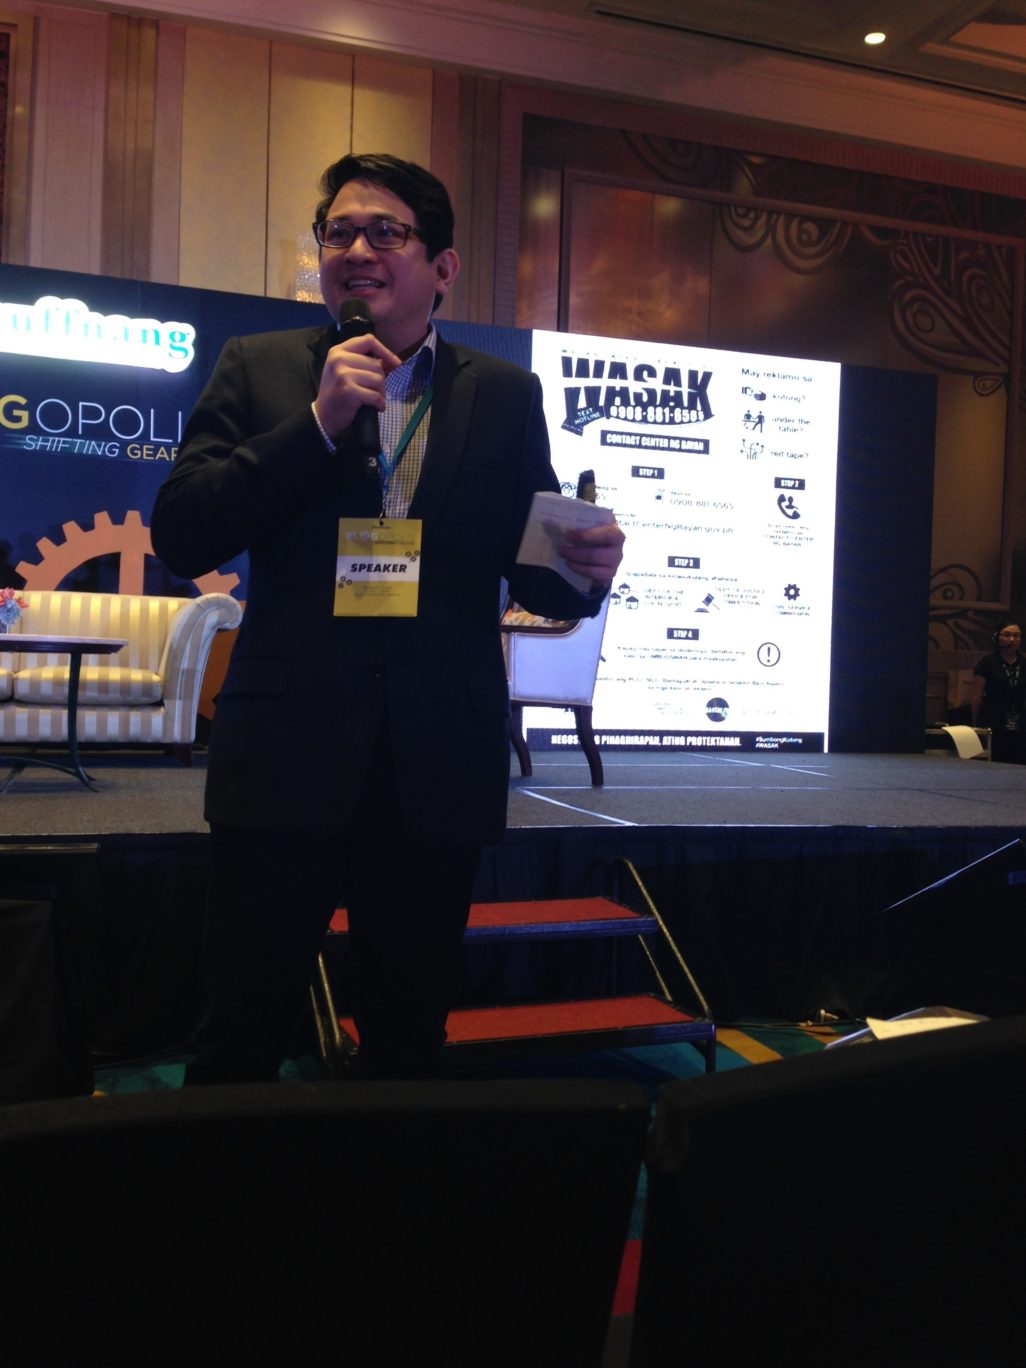 Senator Bam Aquino shared how social media plays an important role in disseminating relevant  news and information.   It was funny how he shared that a photo of his newly born son garnered so much more likes than his socio-political updates. :)